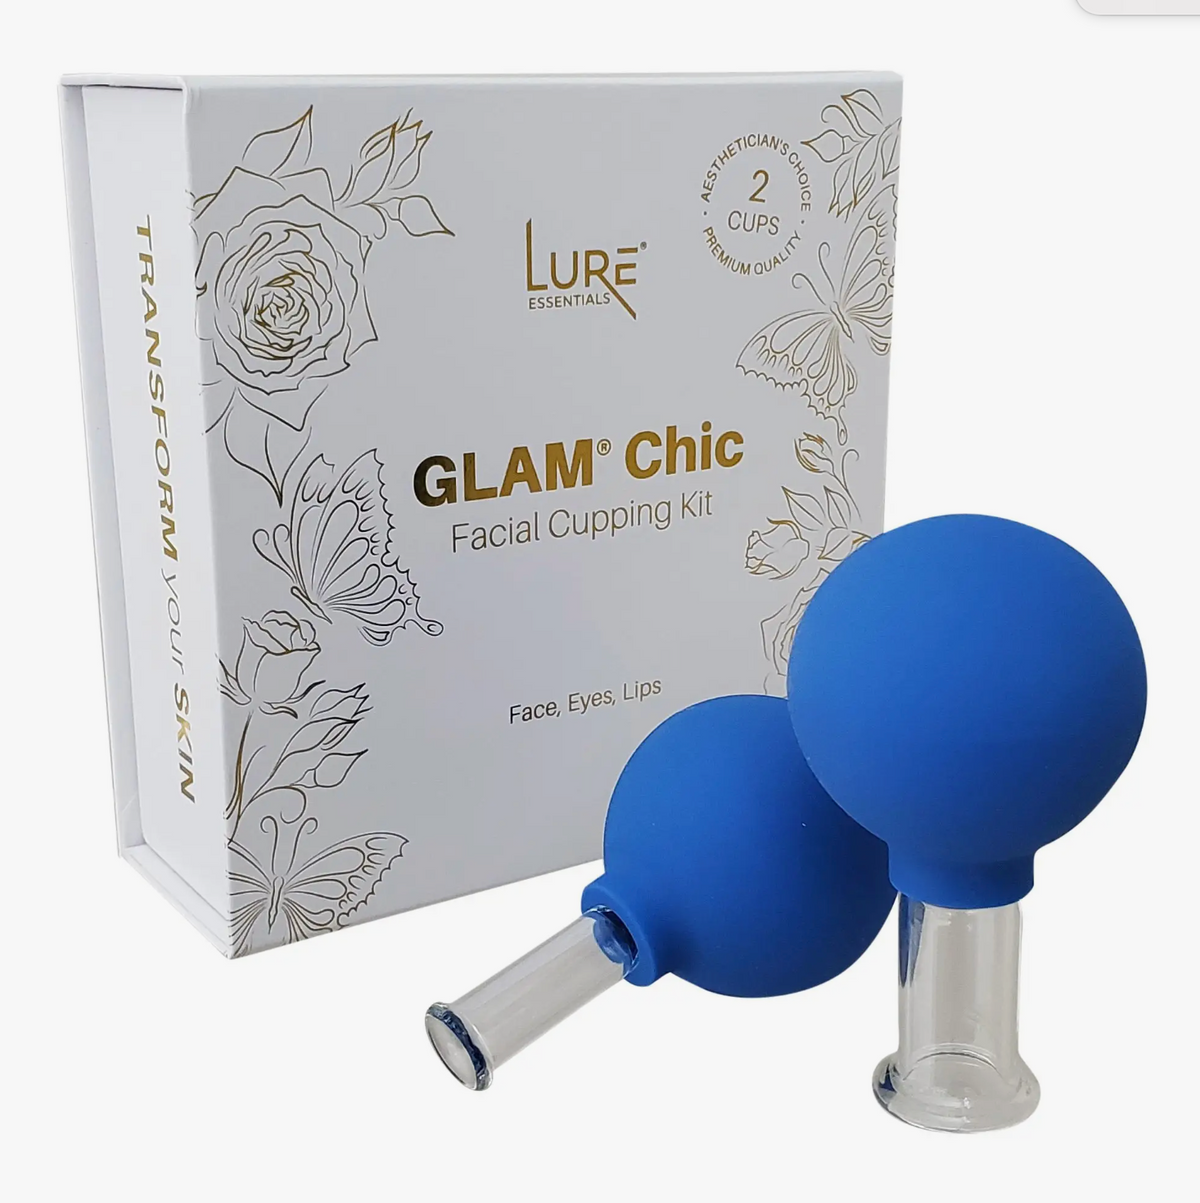 LURE Essentials Glam Chic Facial Cupping Kit